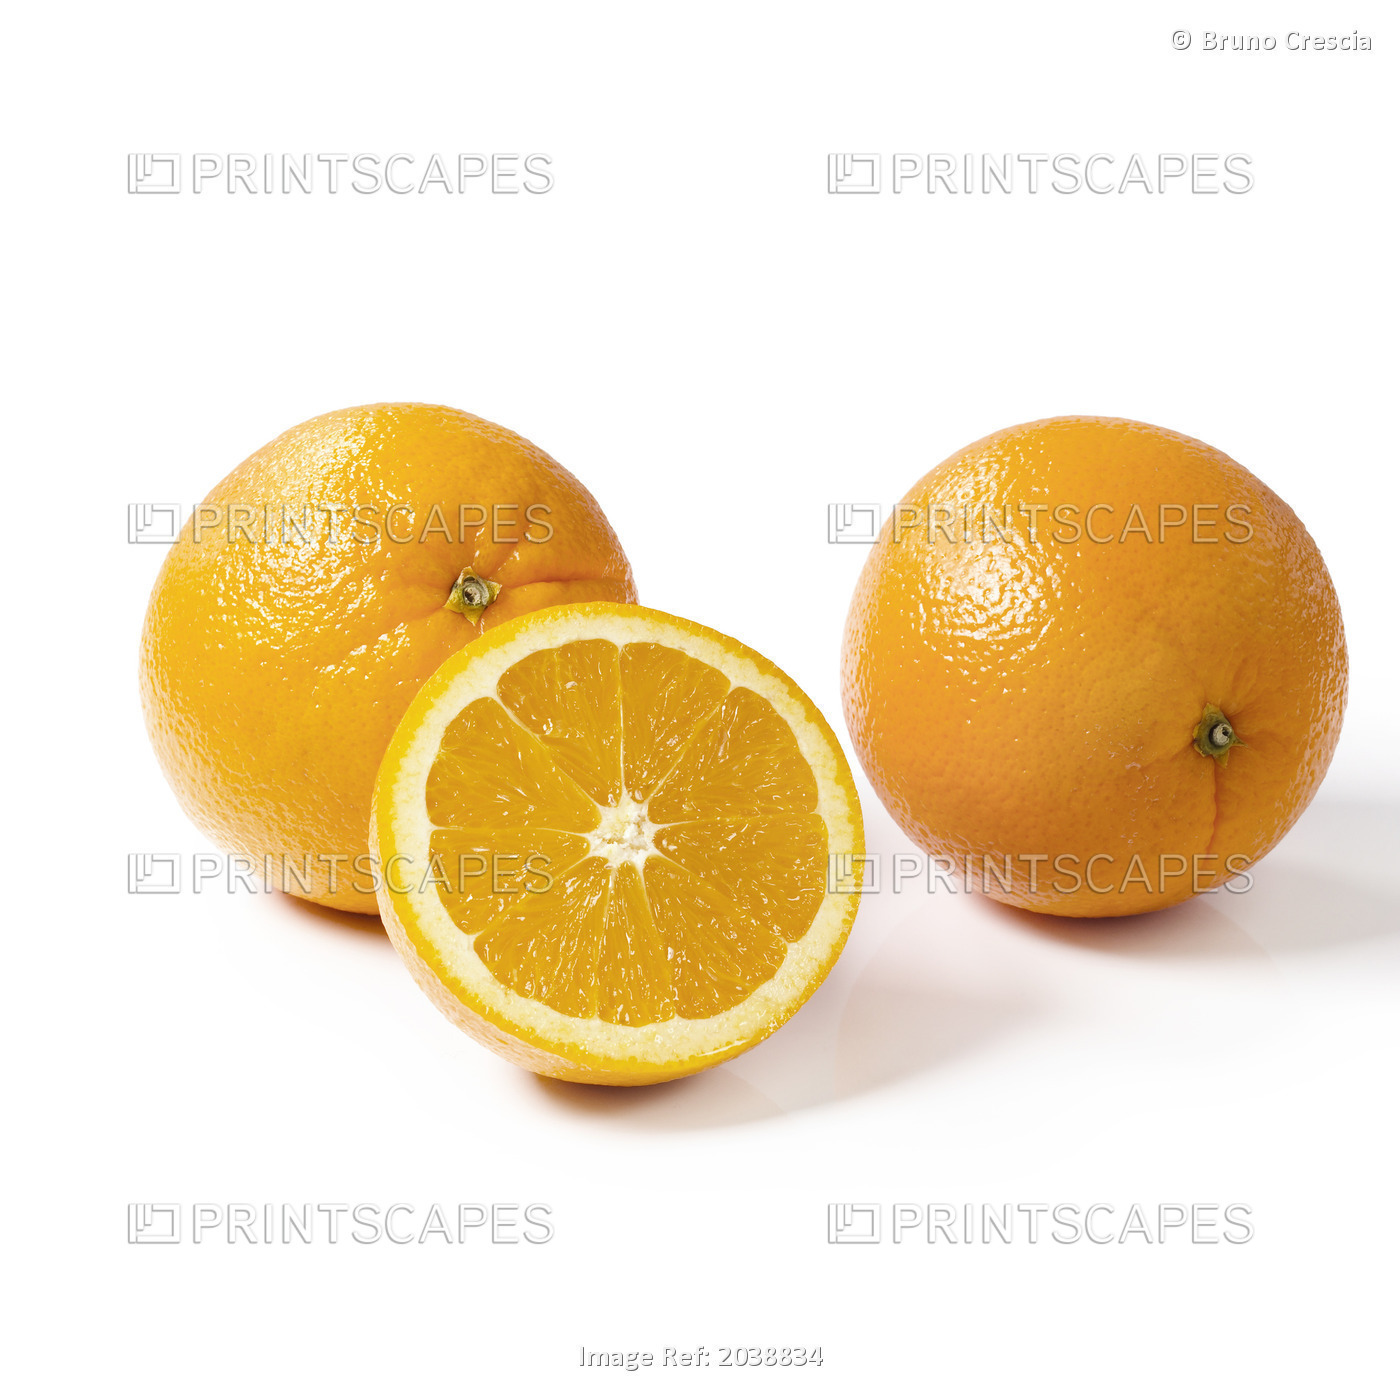 Oranges On A White Background